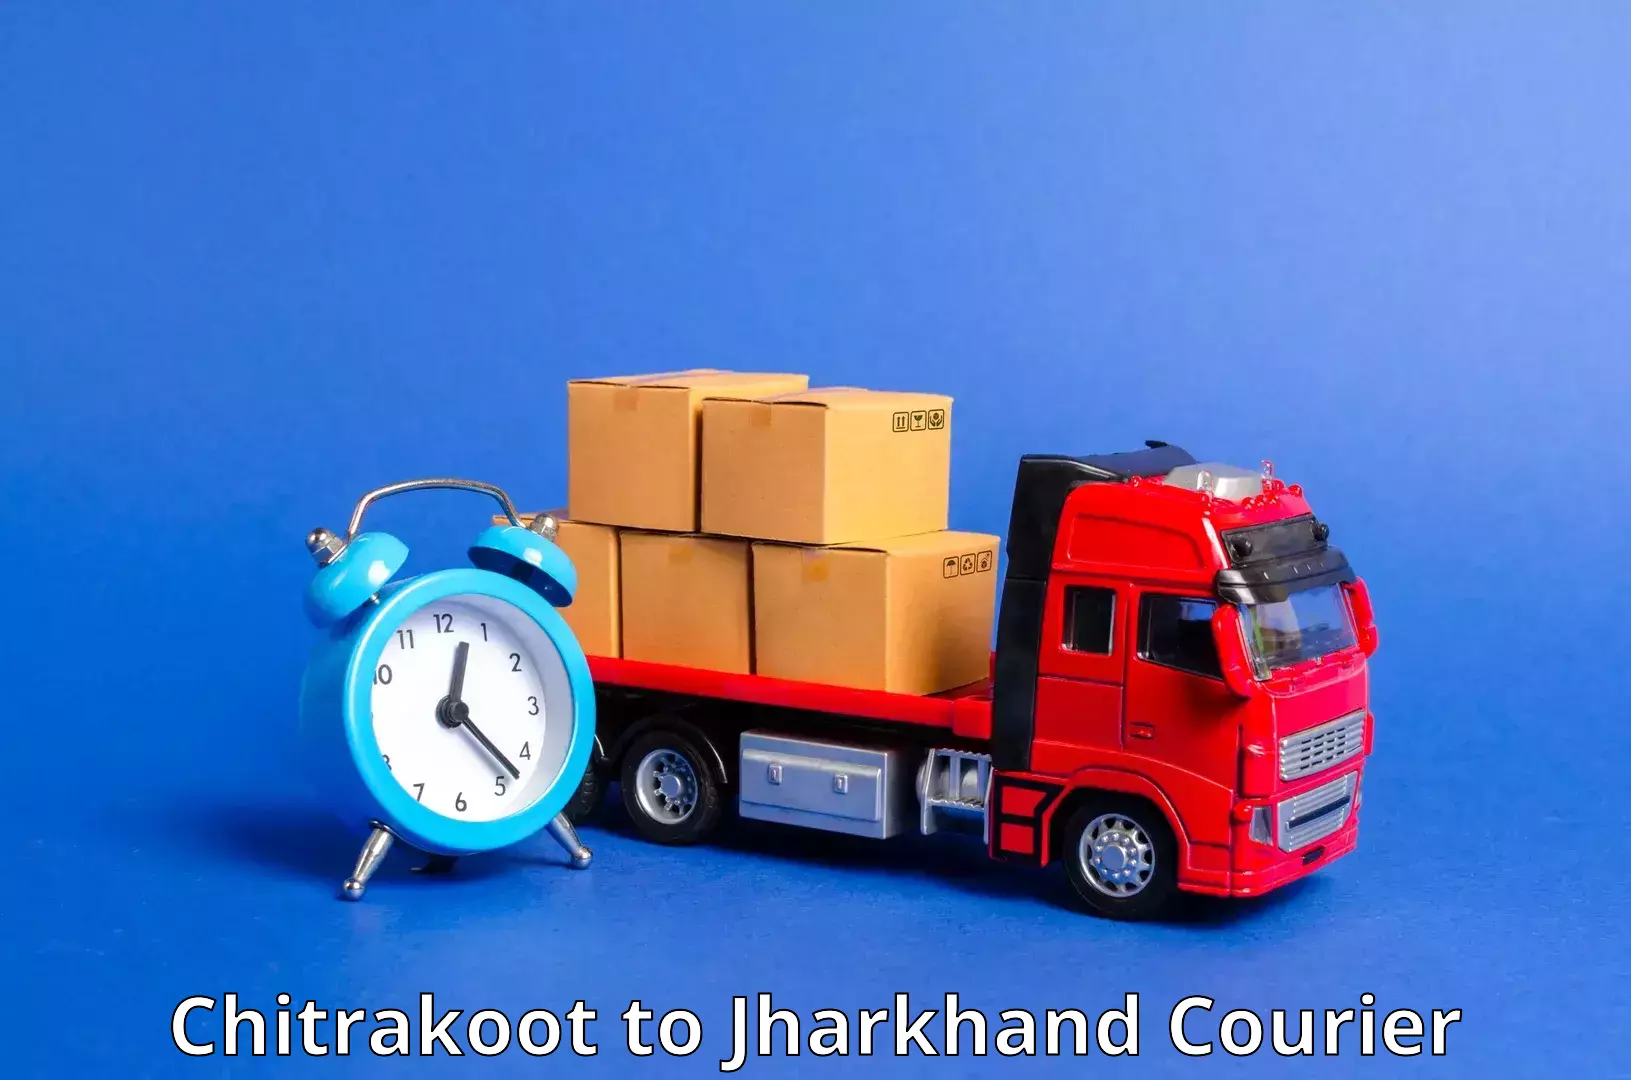 Flexible delivery schedules in Chitrakoot to Latehar